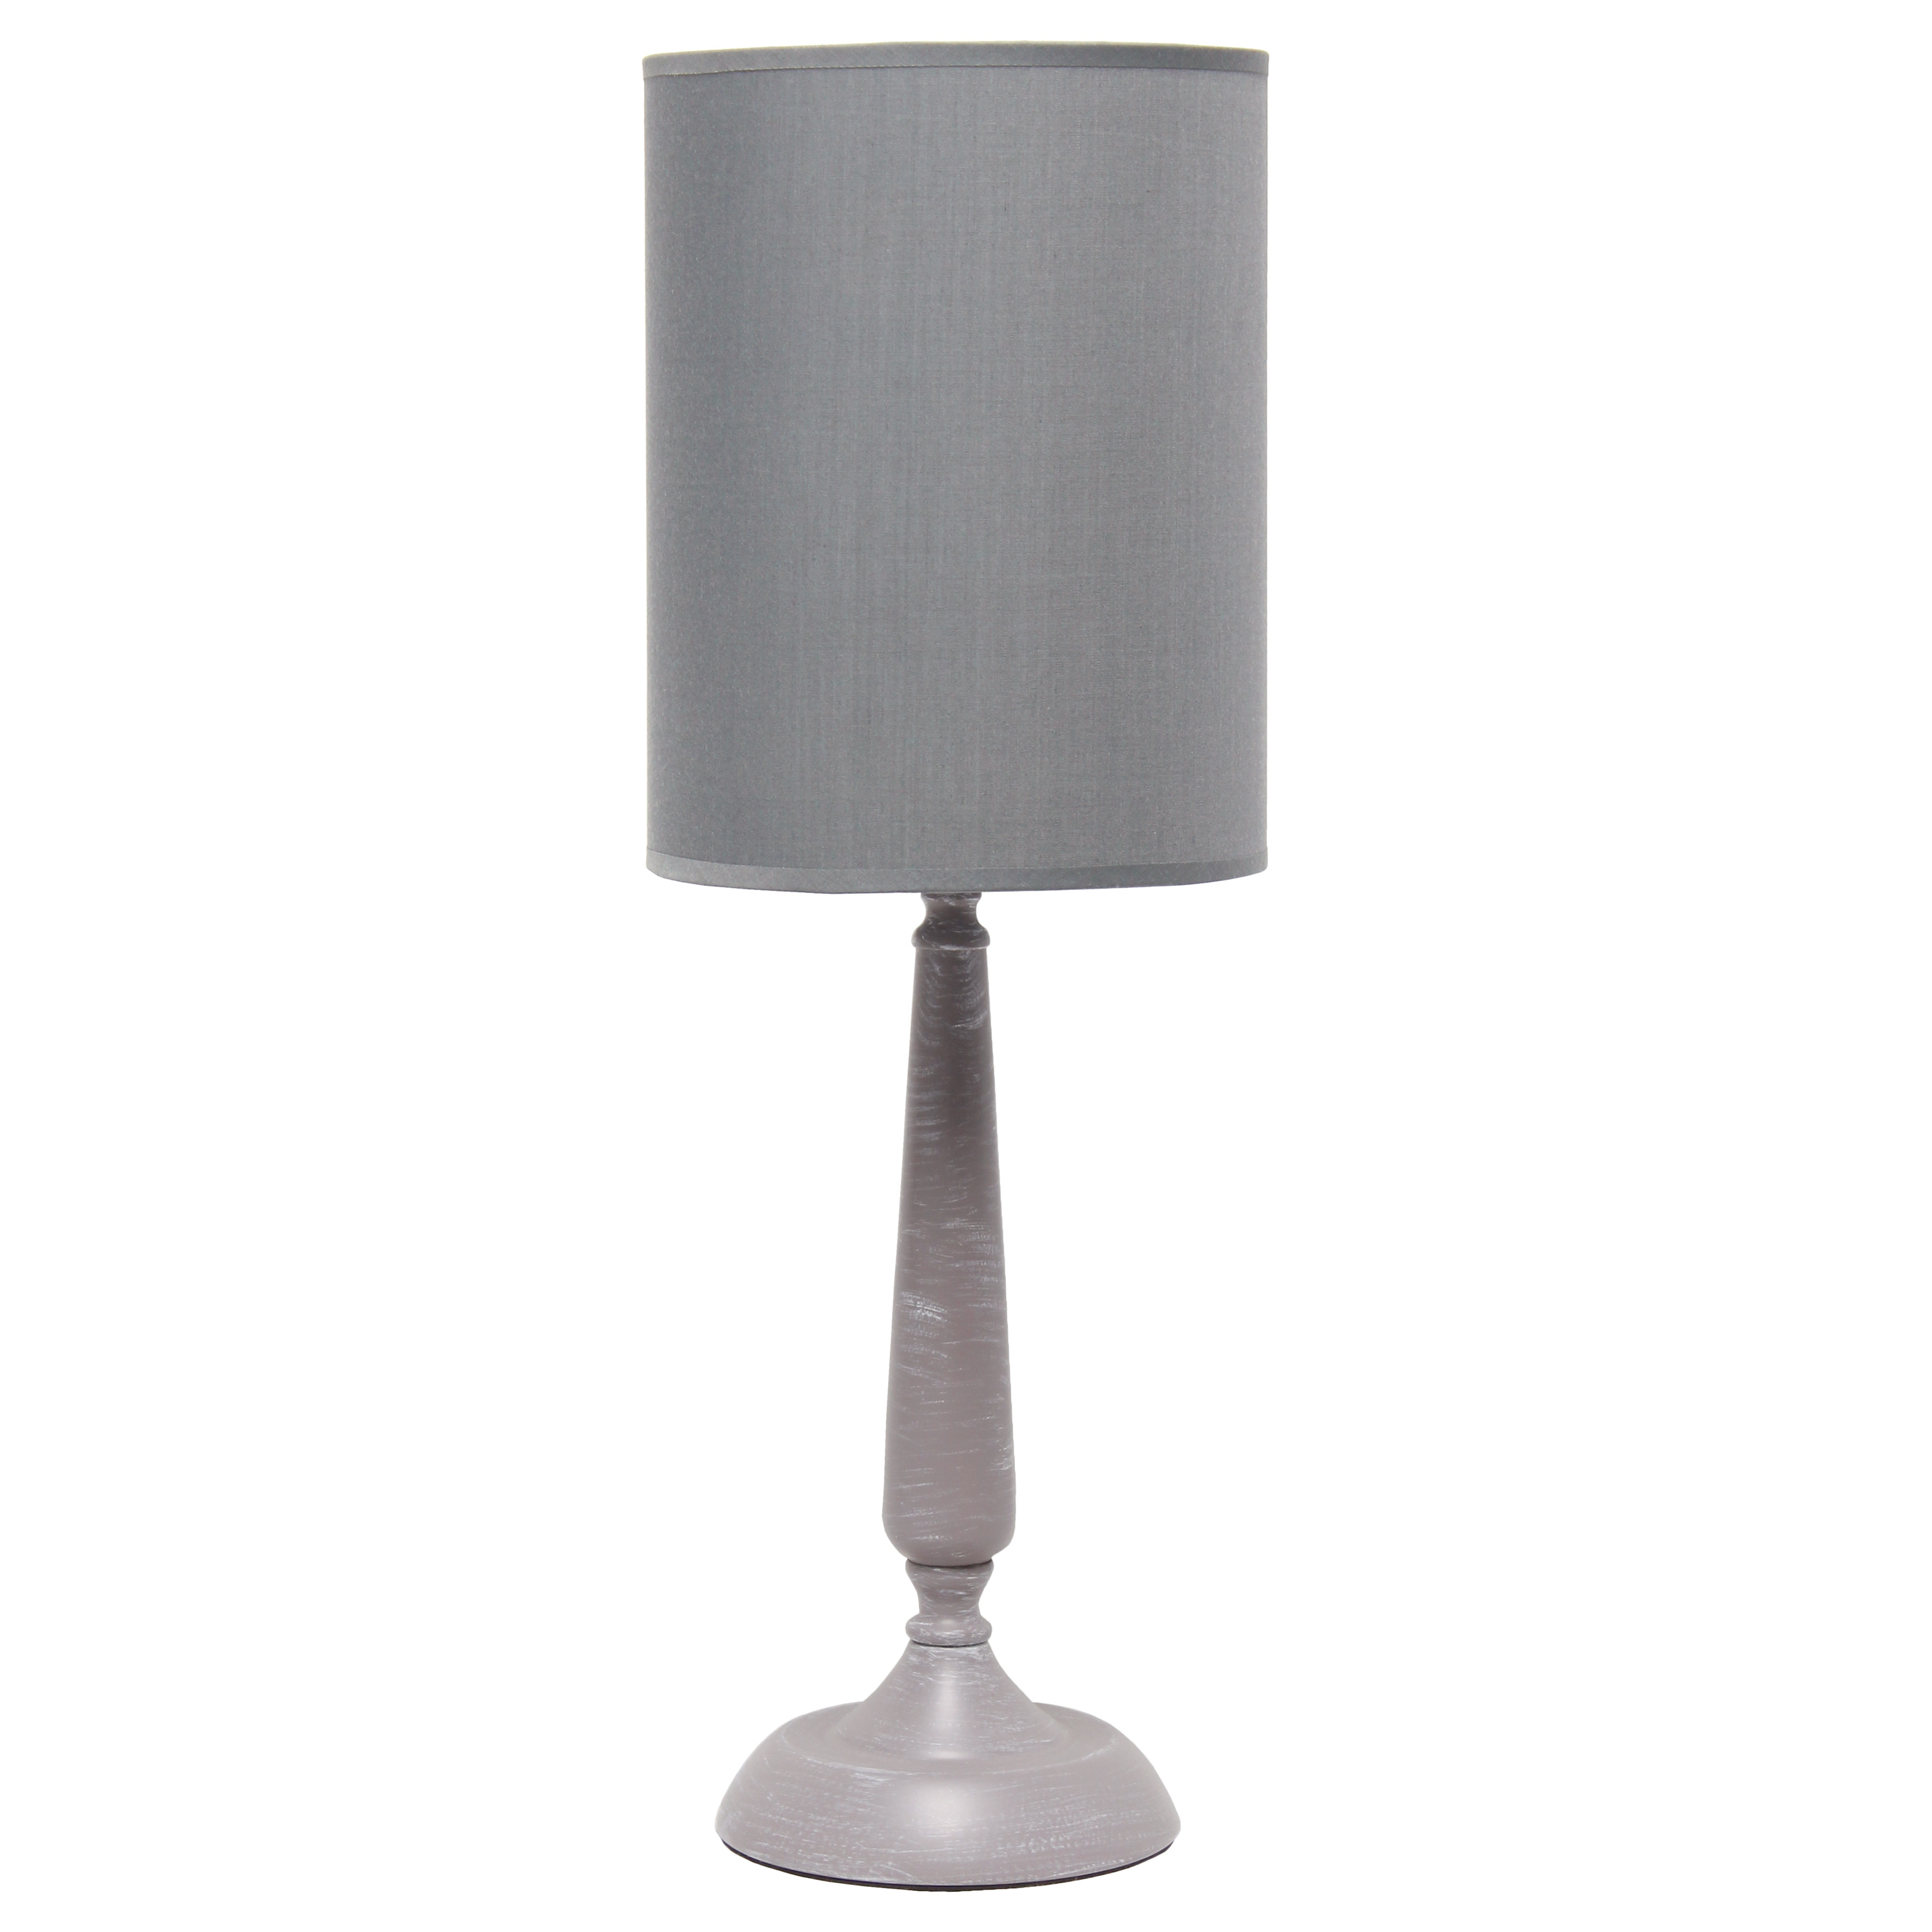 Simple Designs Traditional Candlestick Table Lamp, Gray Wash